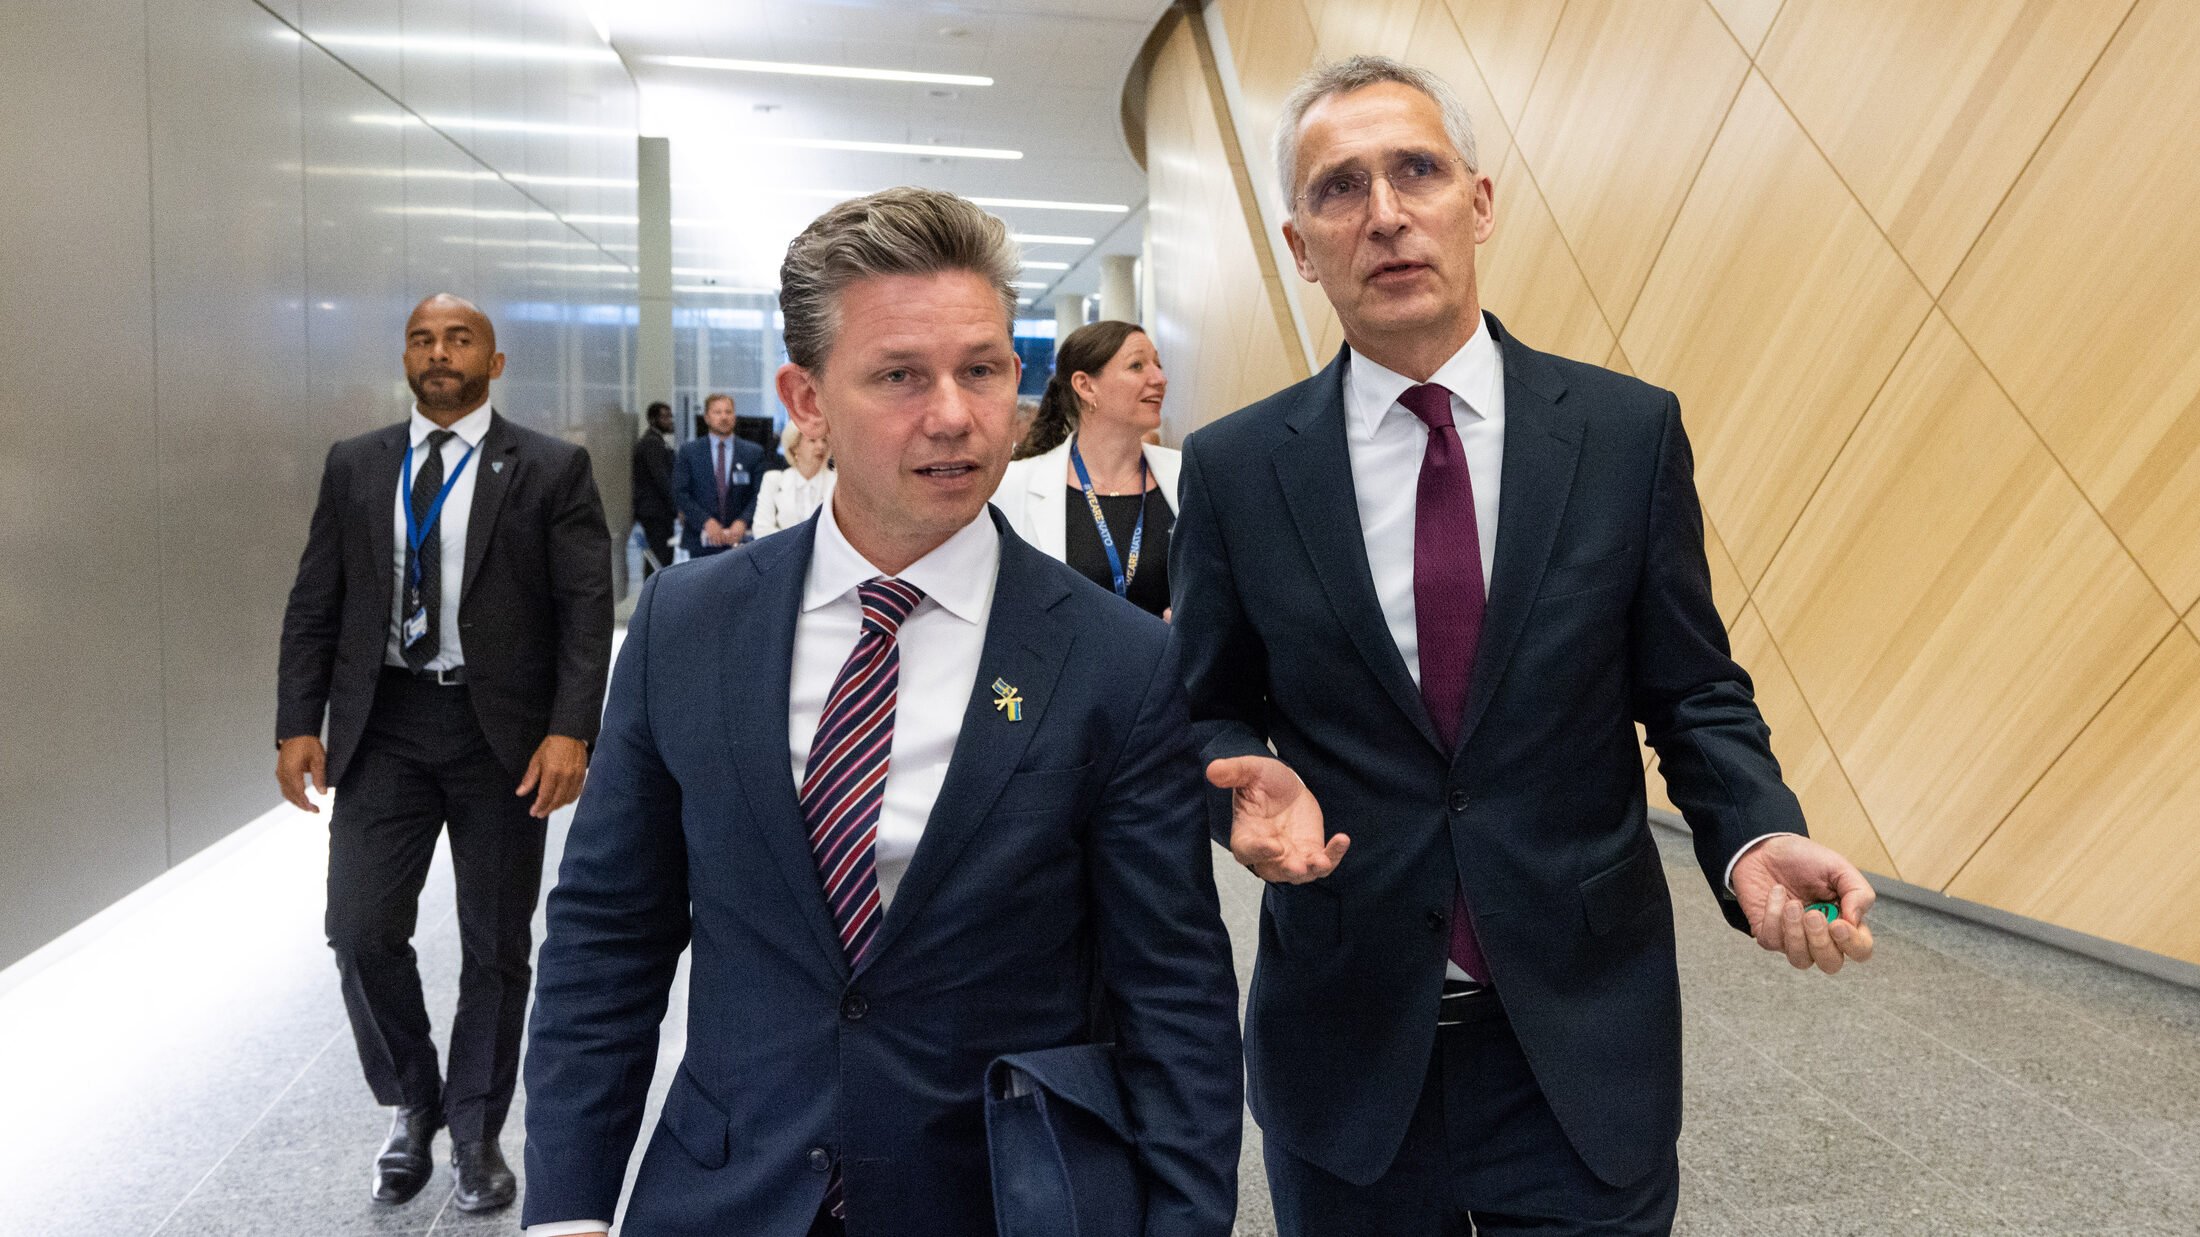 Official Photo – Meeting of NATO Ministers of Defence